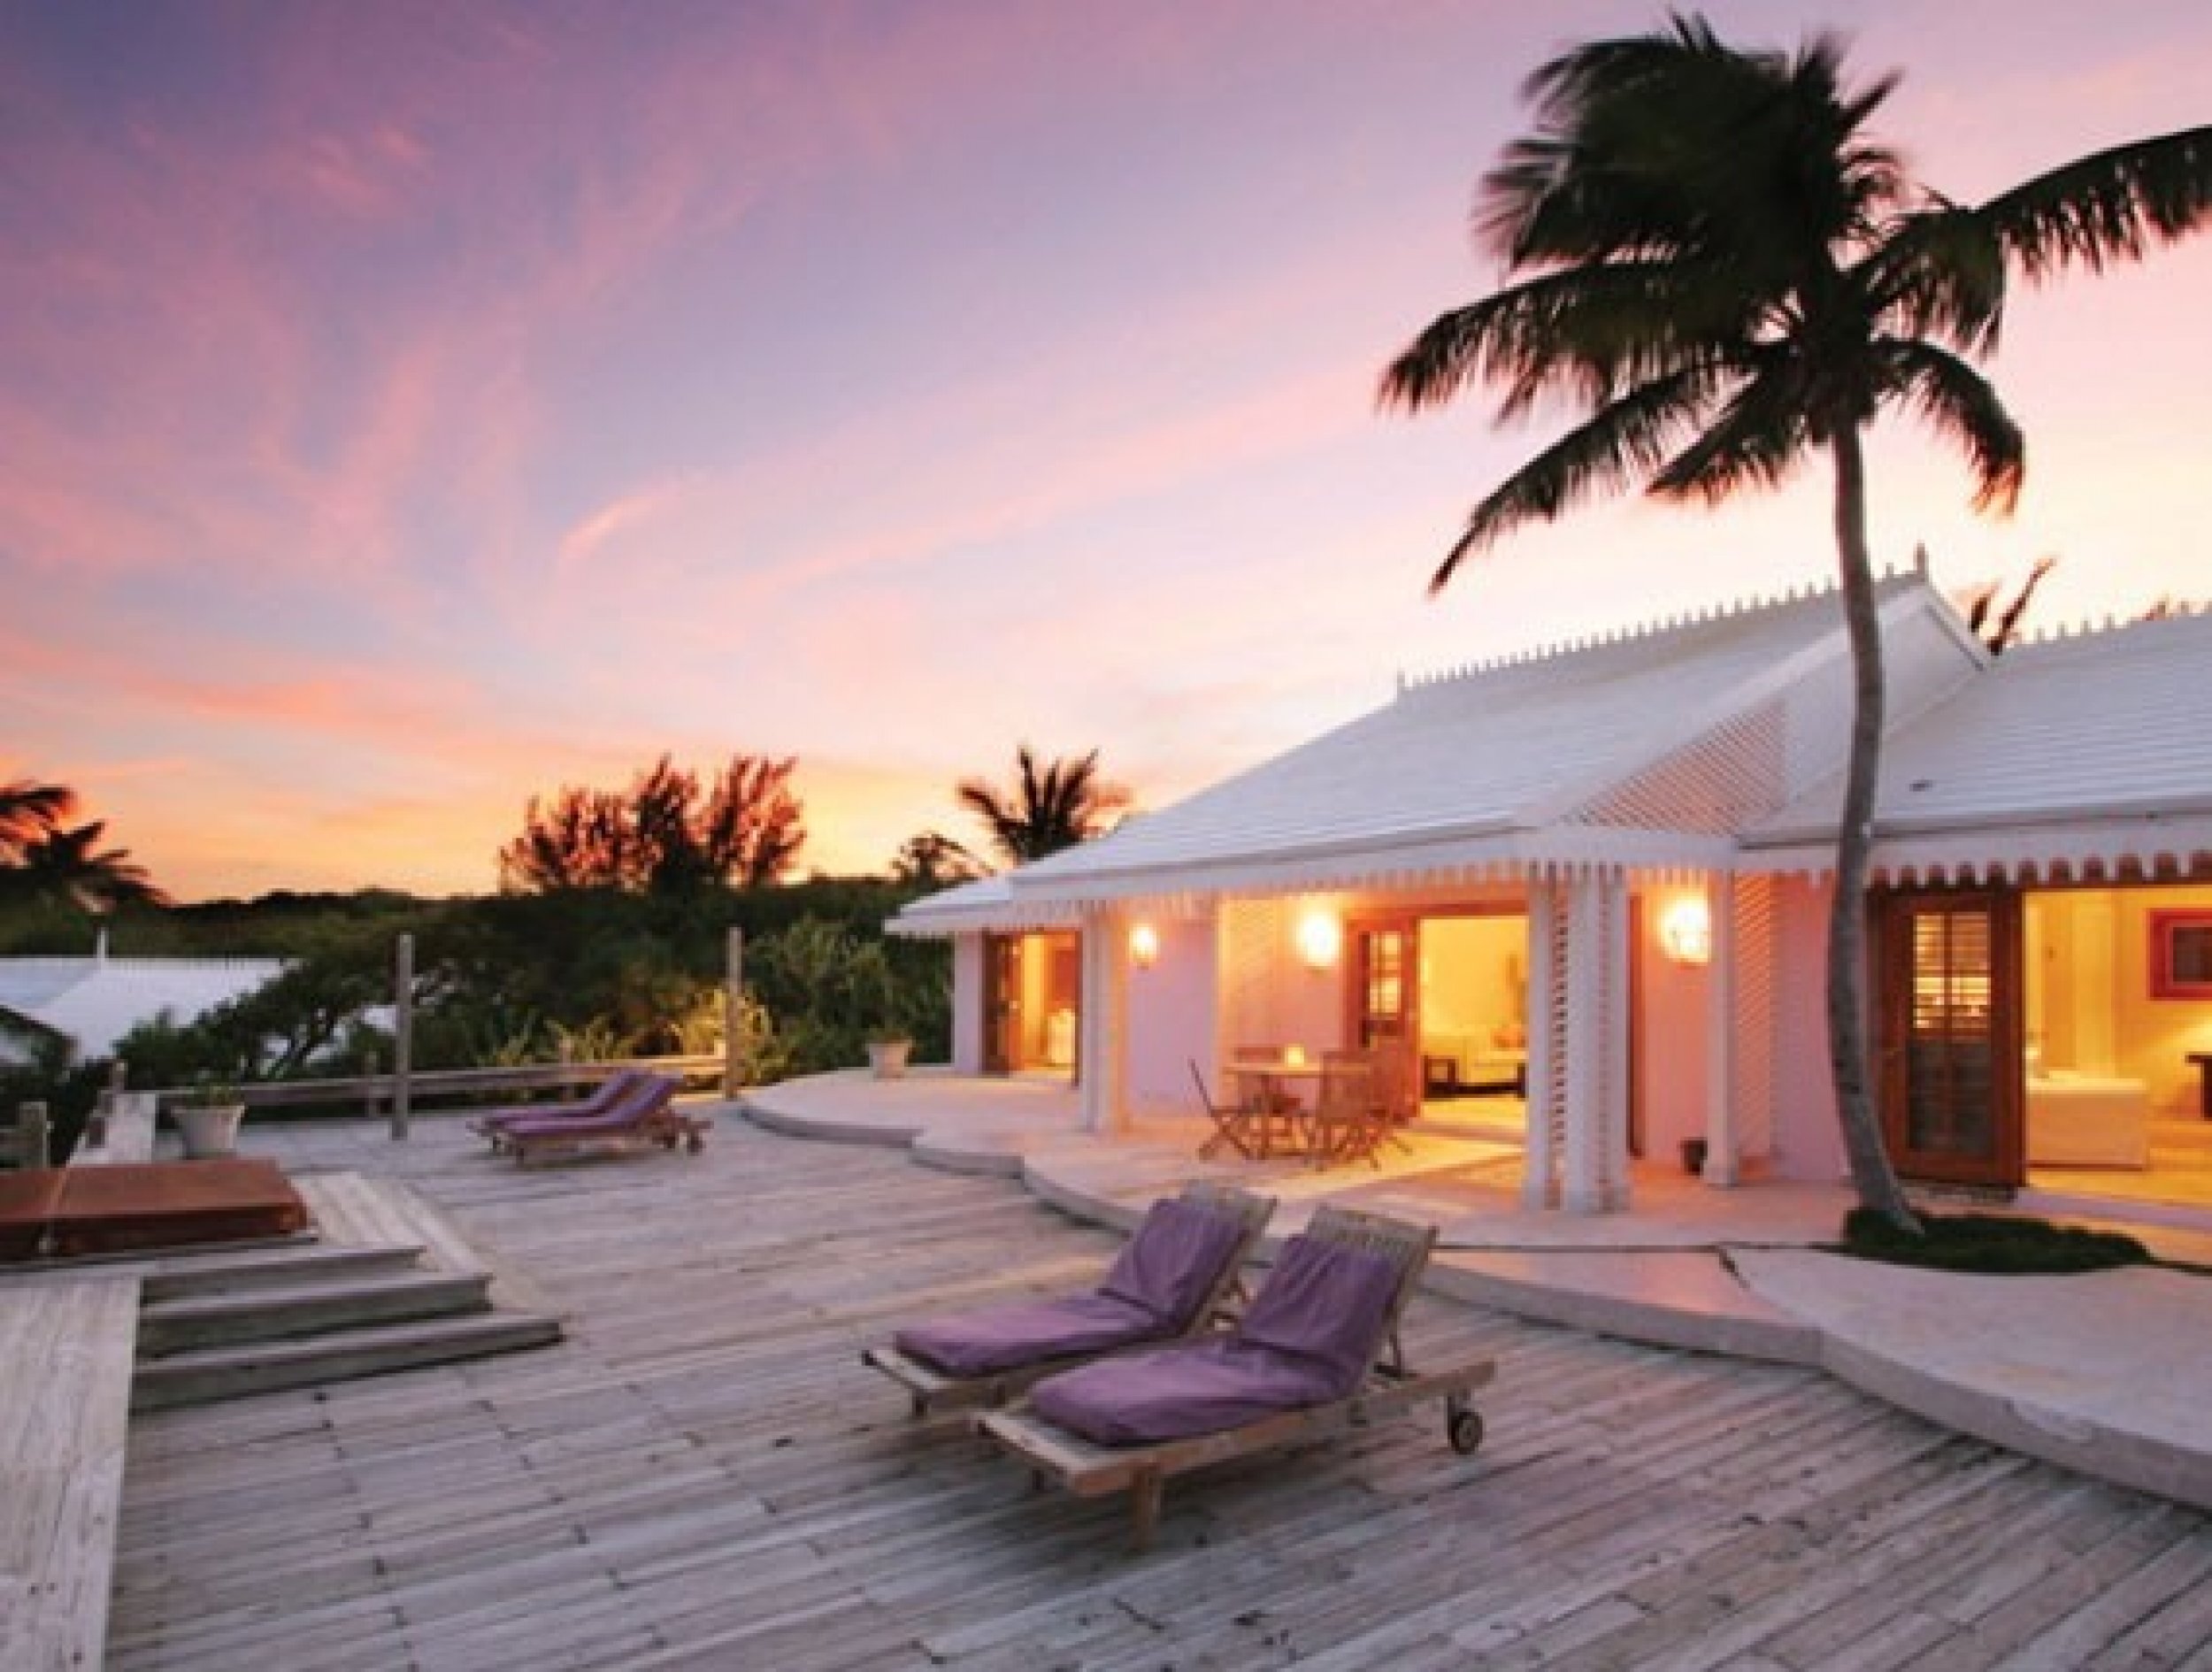 Private Residences at the Pink Sands resort on the Bahamas